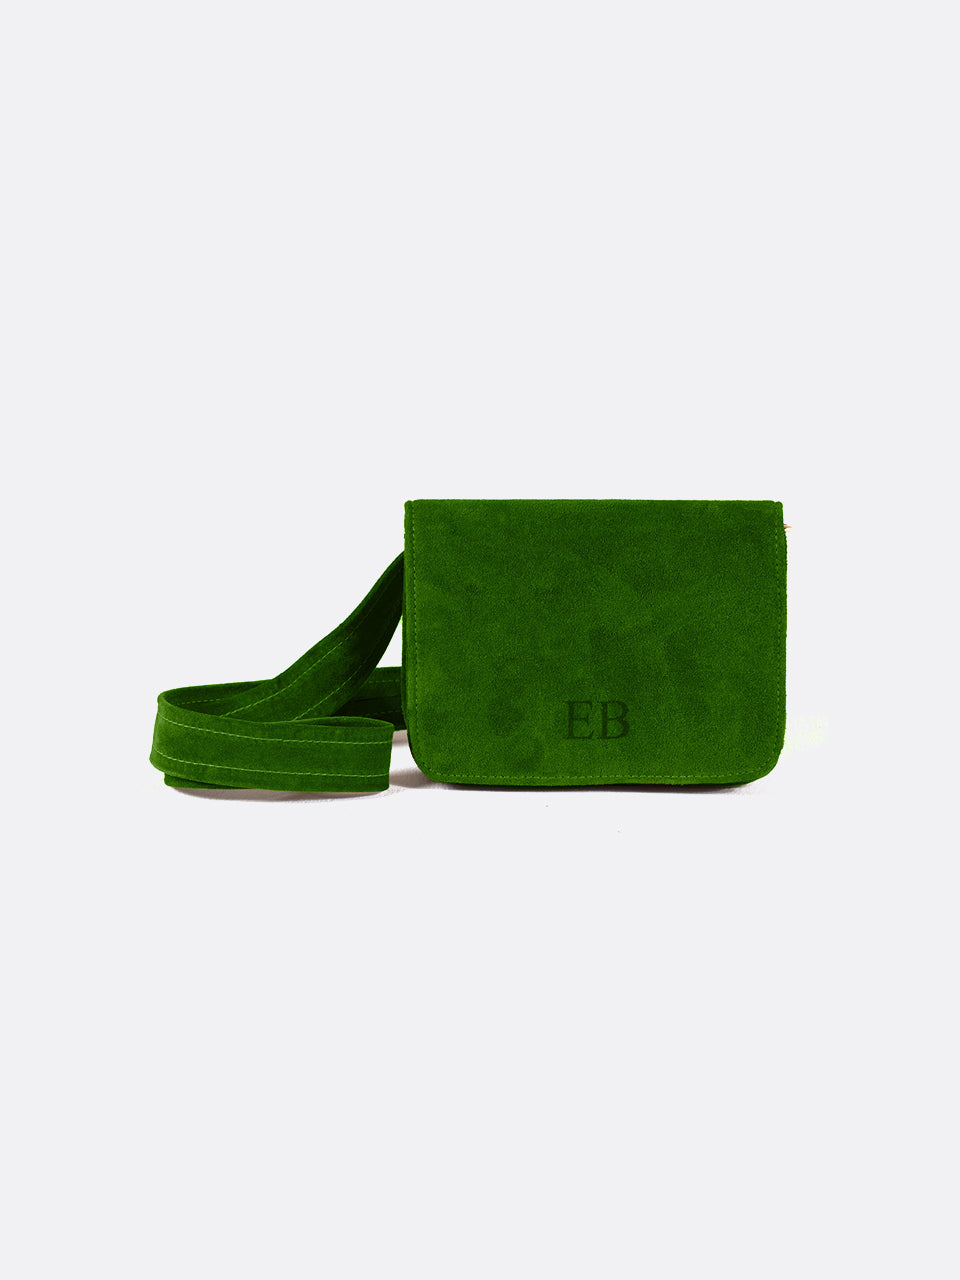 Italian Suede Leather Pouch for women - Green - 18